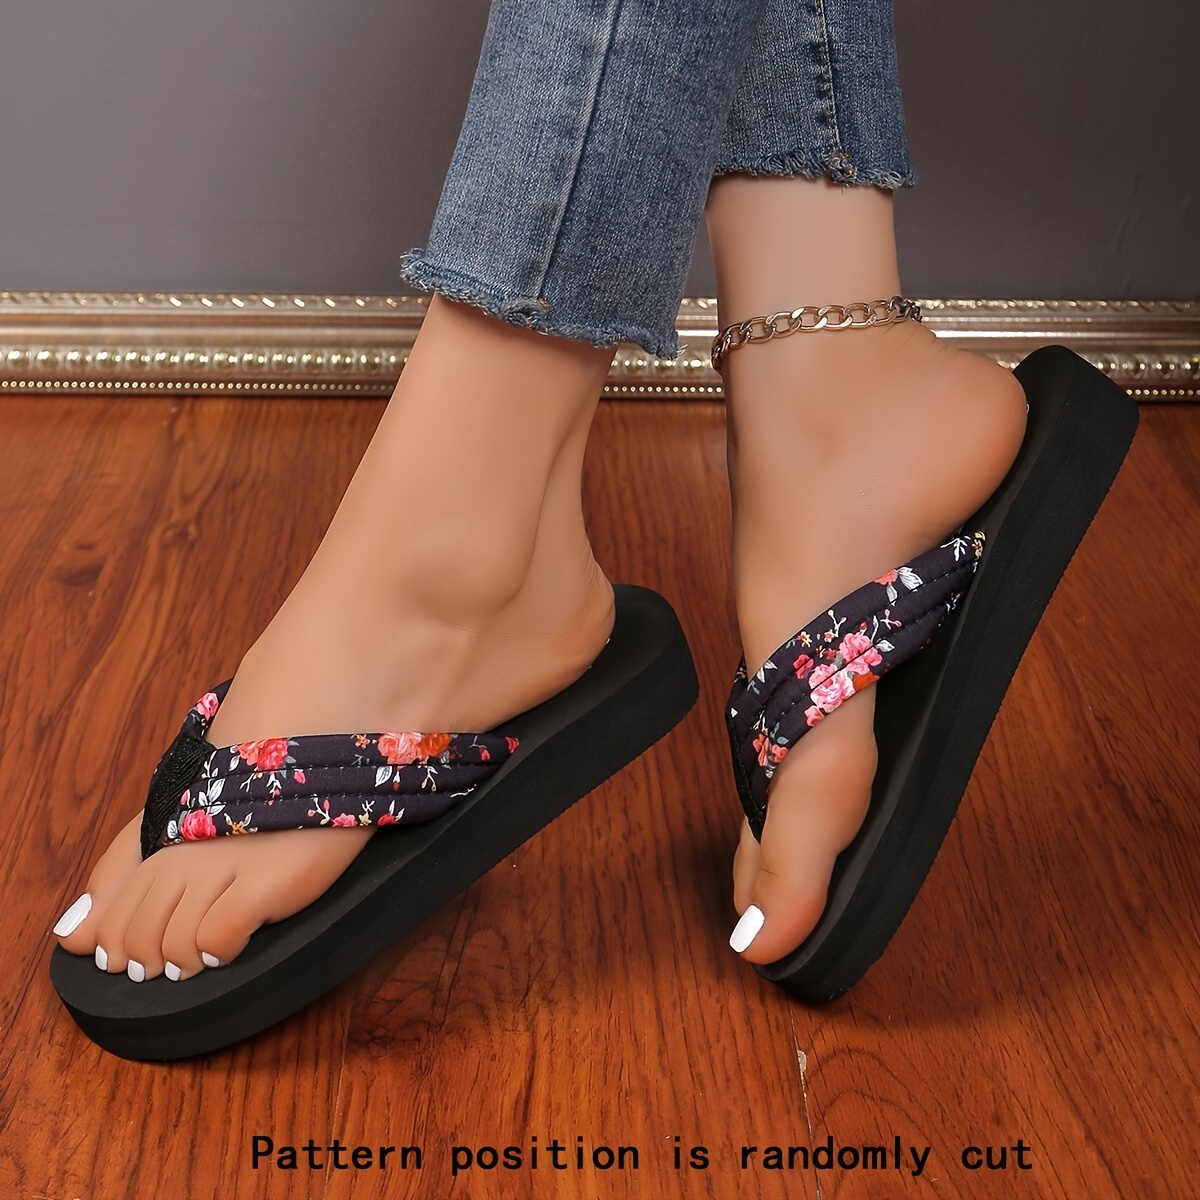 

Women's Fashion Floral Print Flip Flops, Fabric Material, Comfy Summer Beach Sandals, Casual Thong Slides, Trendy Footwear For Outdoor And Indoor Use